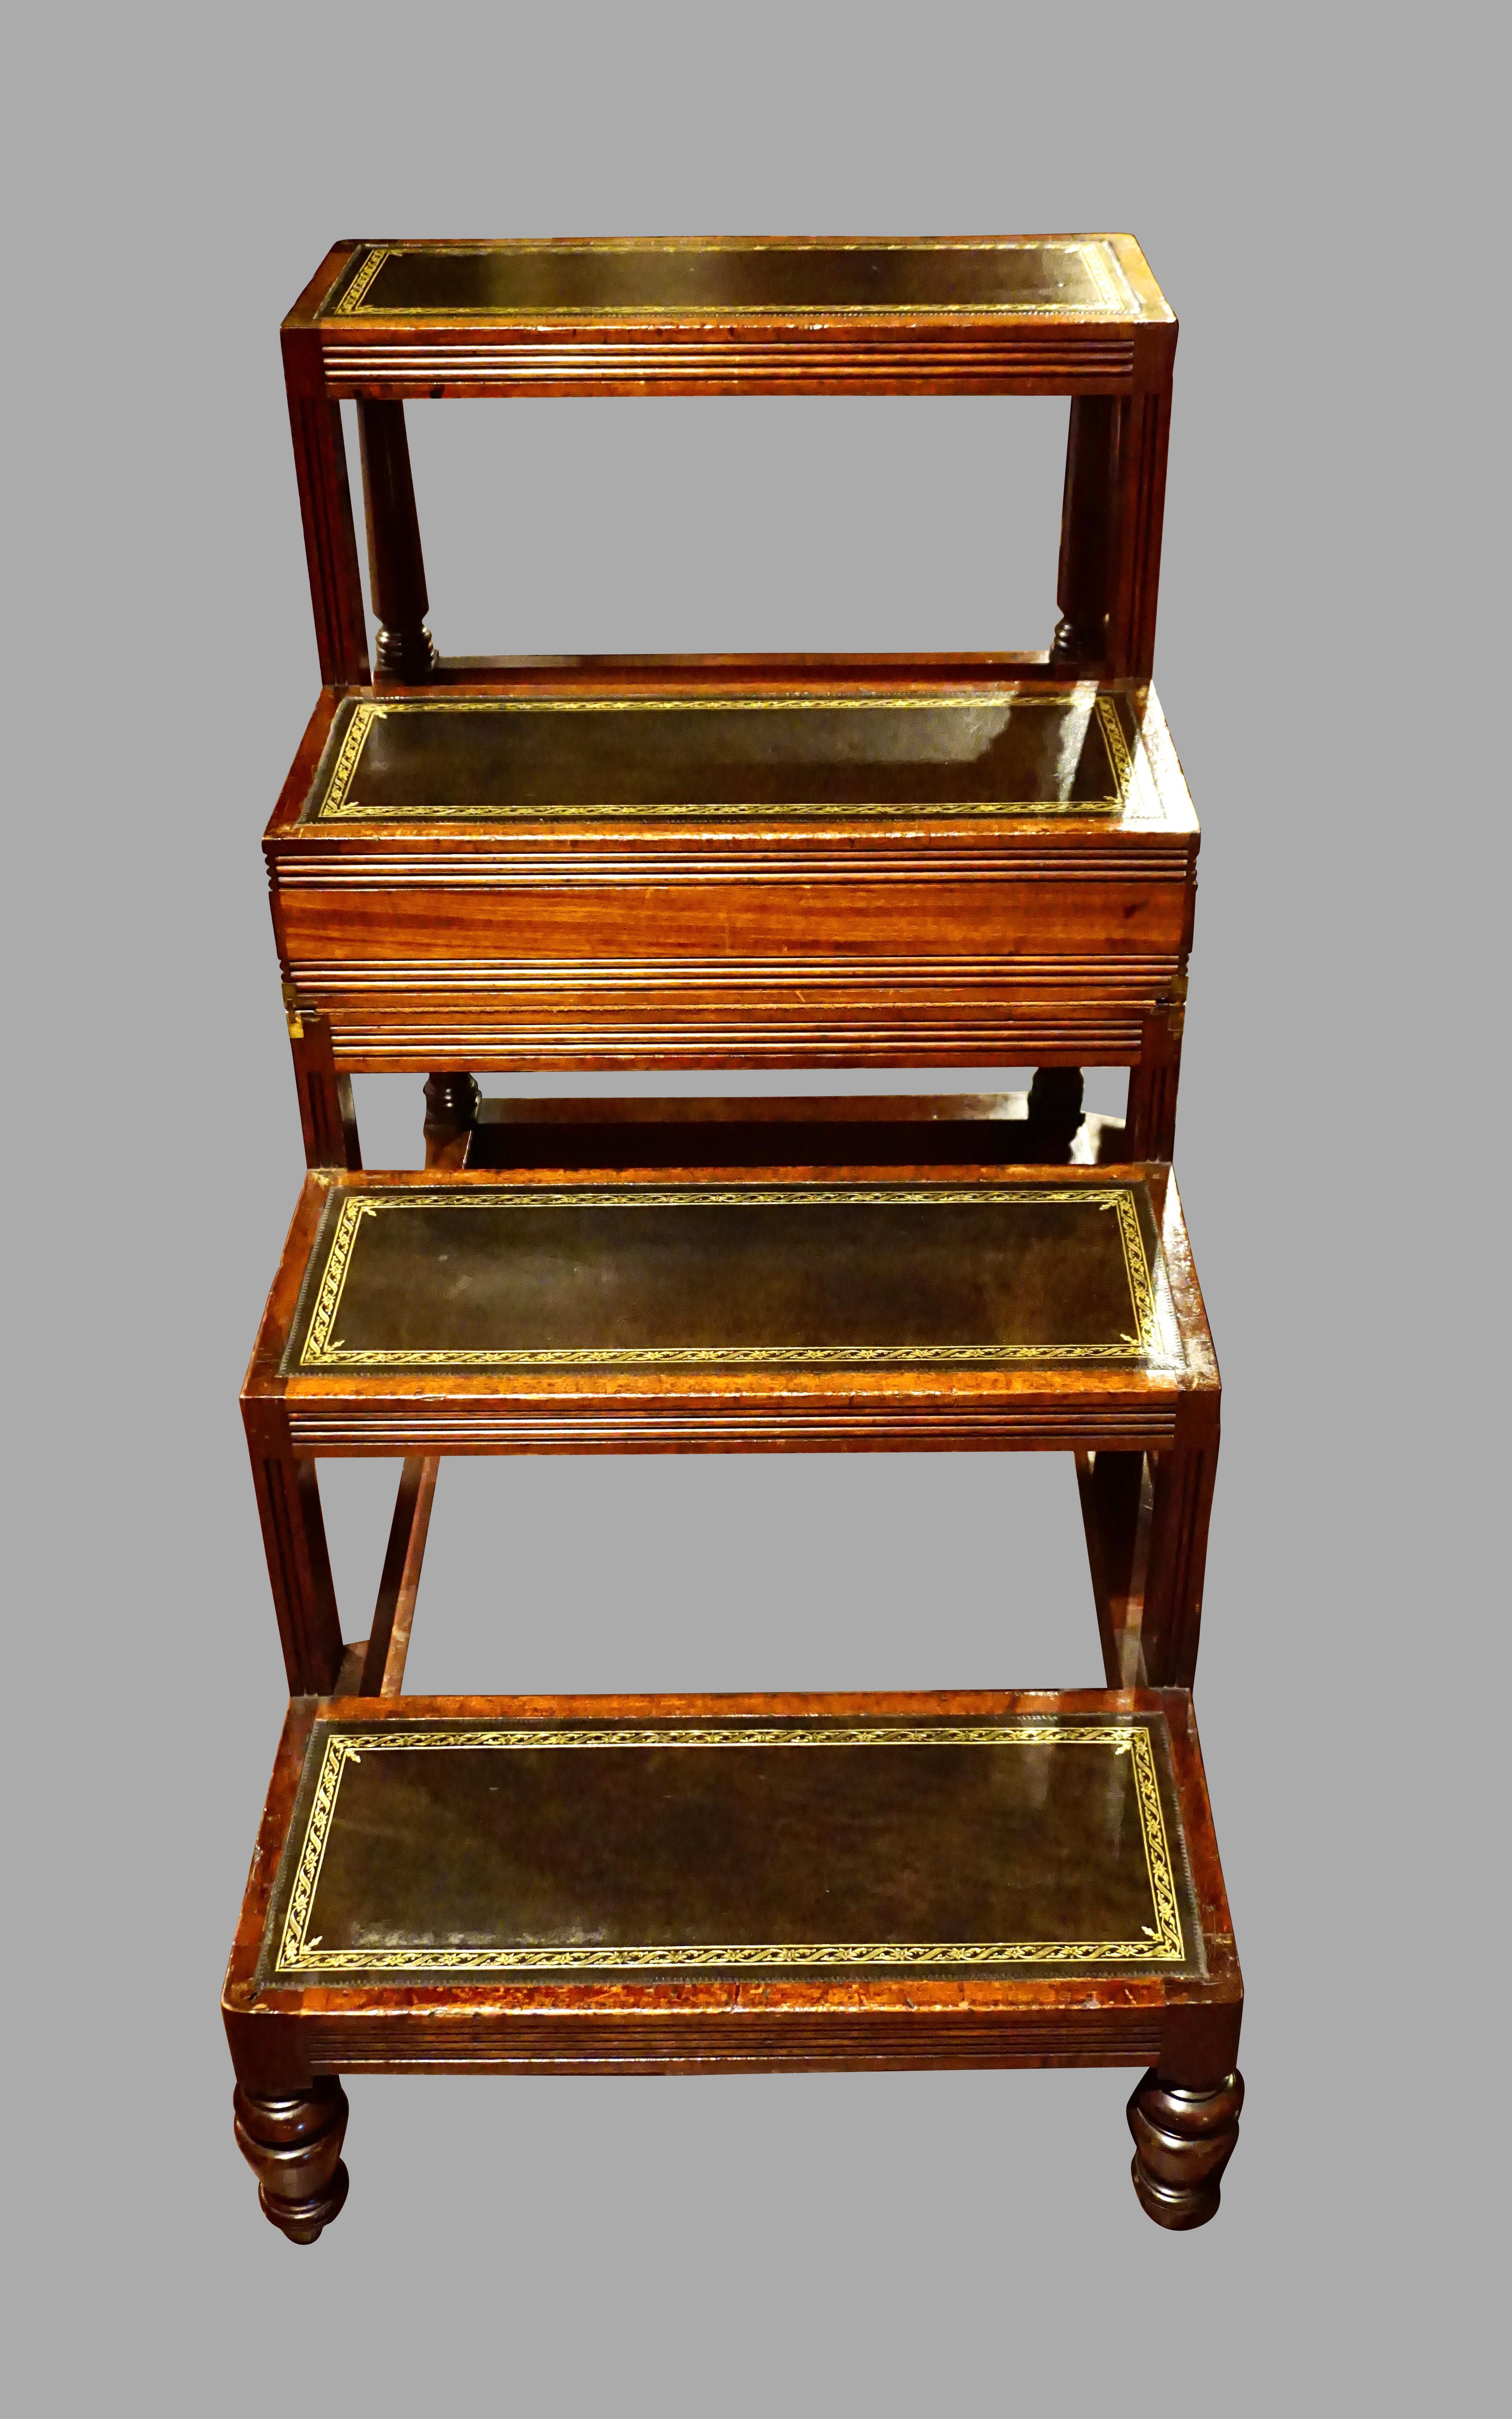 English Regency Style Metamorphic Library Table with Leather Lined Steps 2